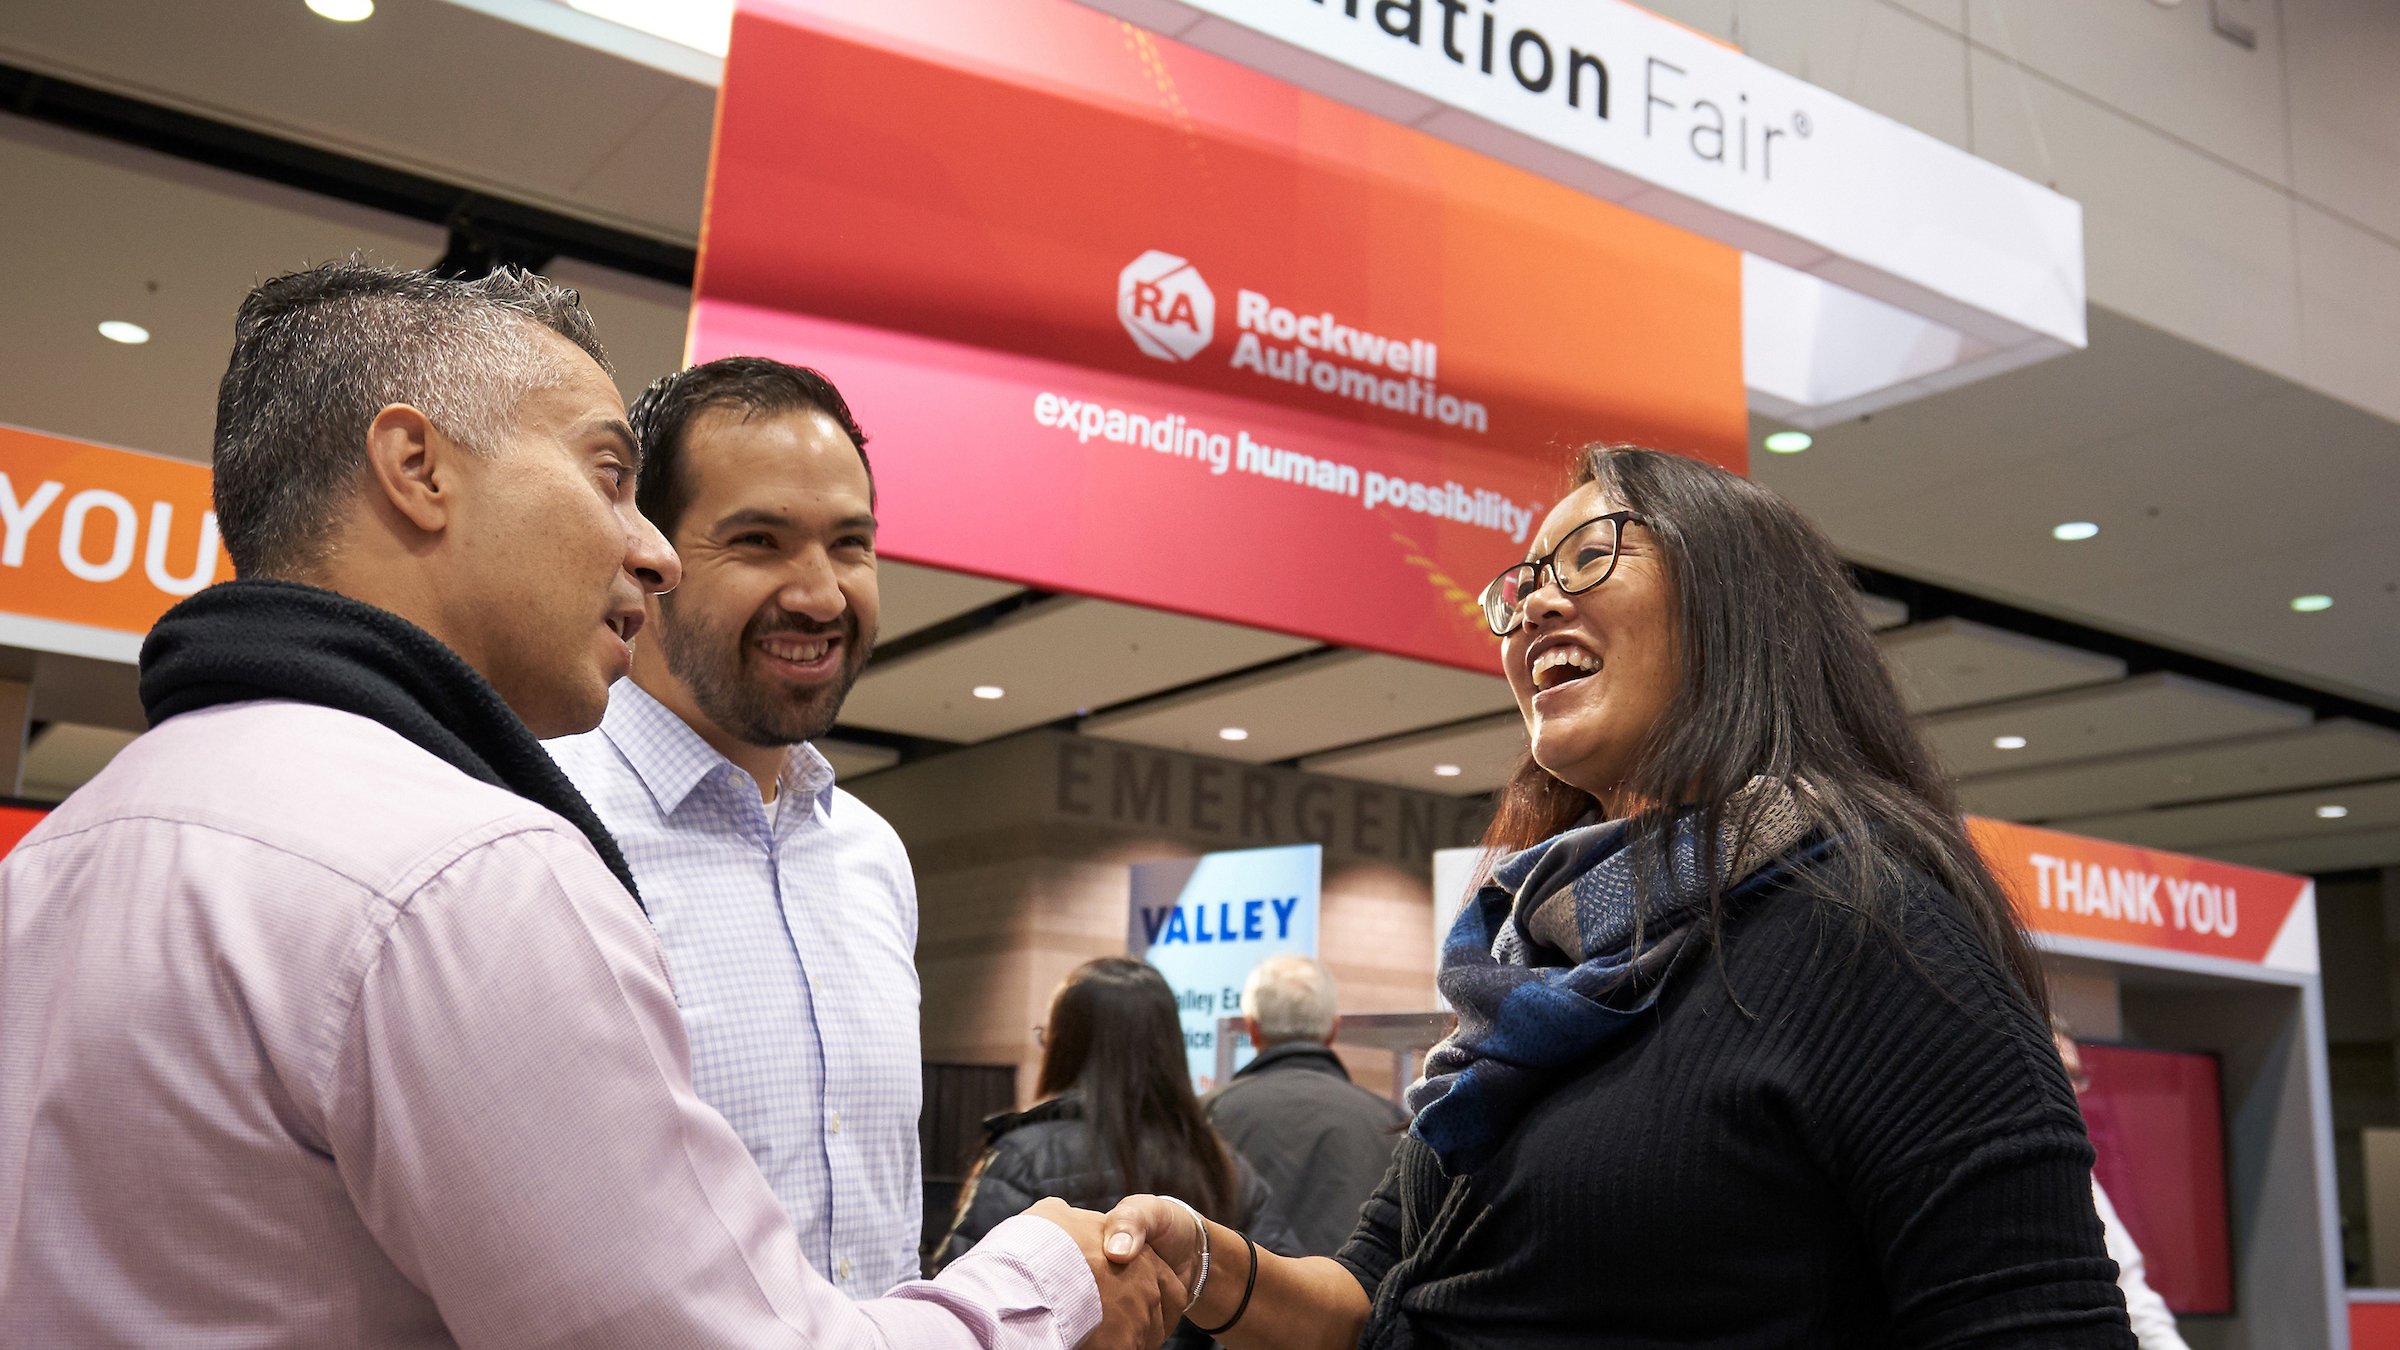 Two males and a female conversing and shaking hands with an Automation Fair banner in the background